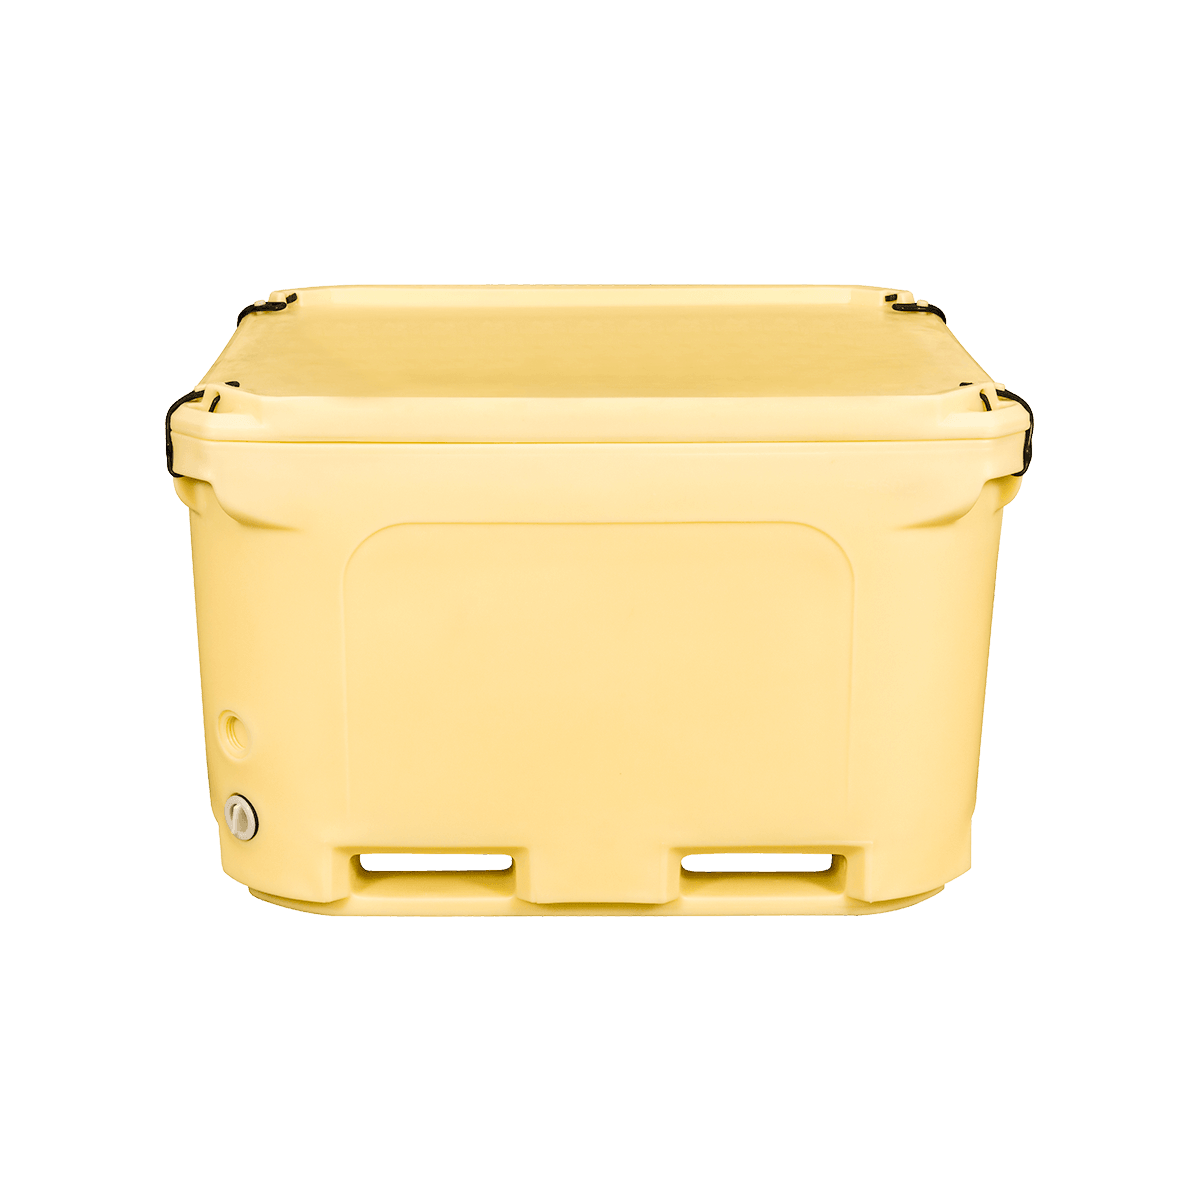 F-660L Insulated Fish Containers Seafood Industrial Use Plastic Containers